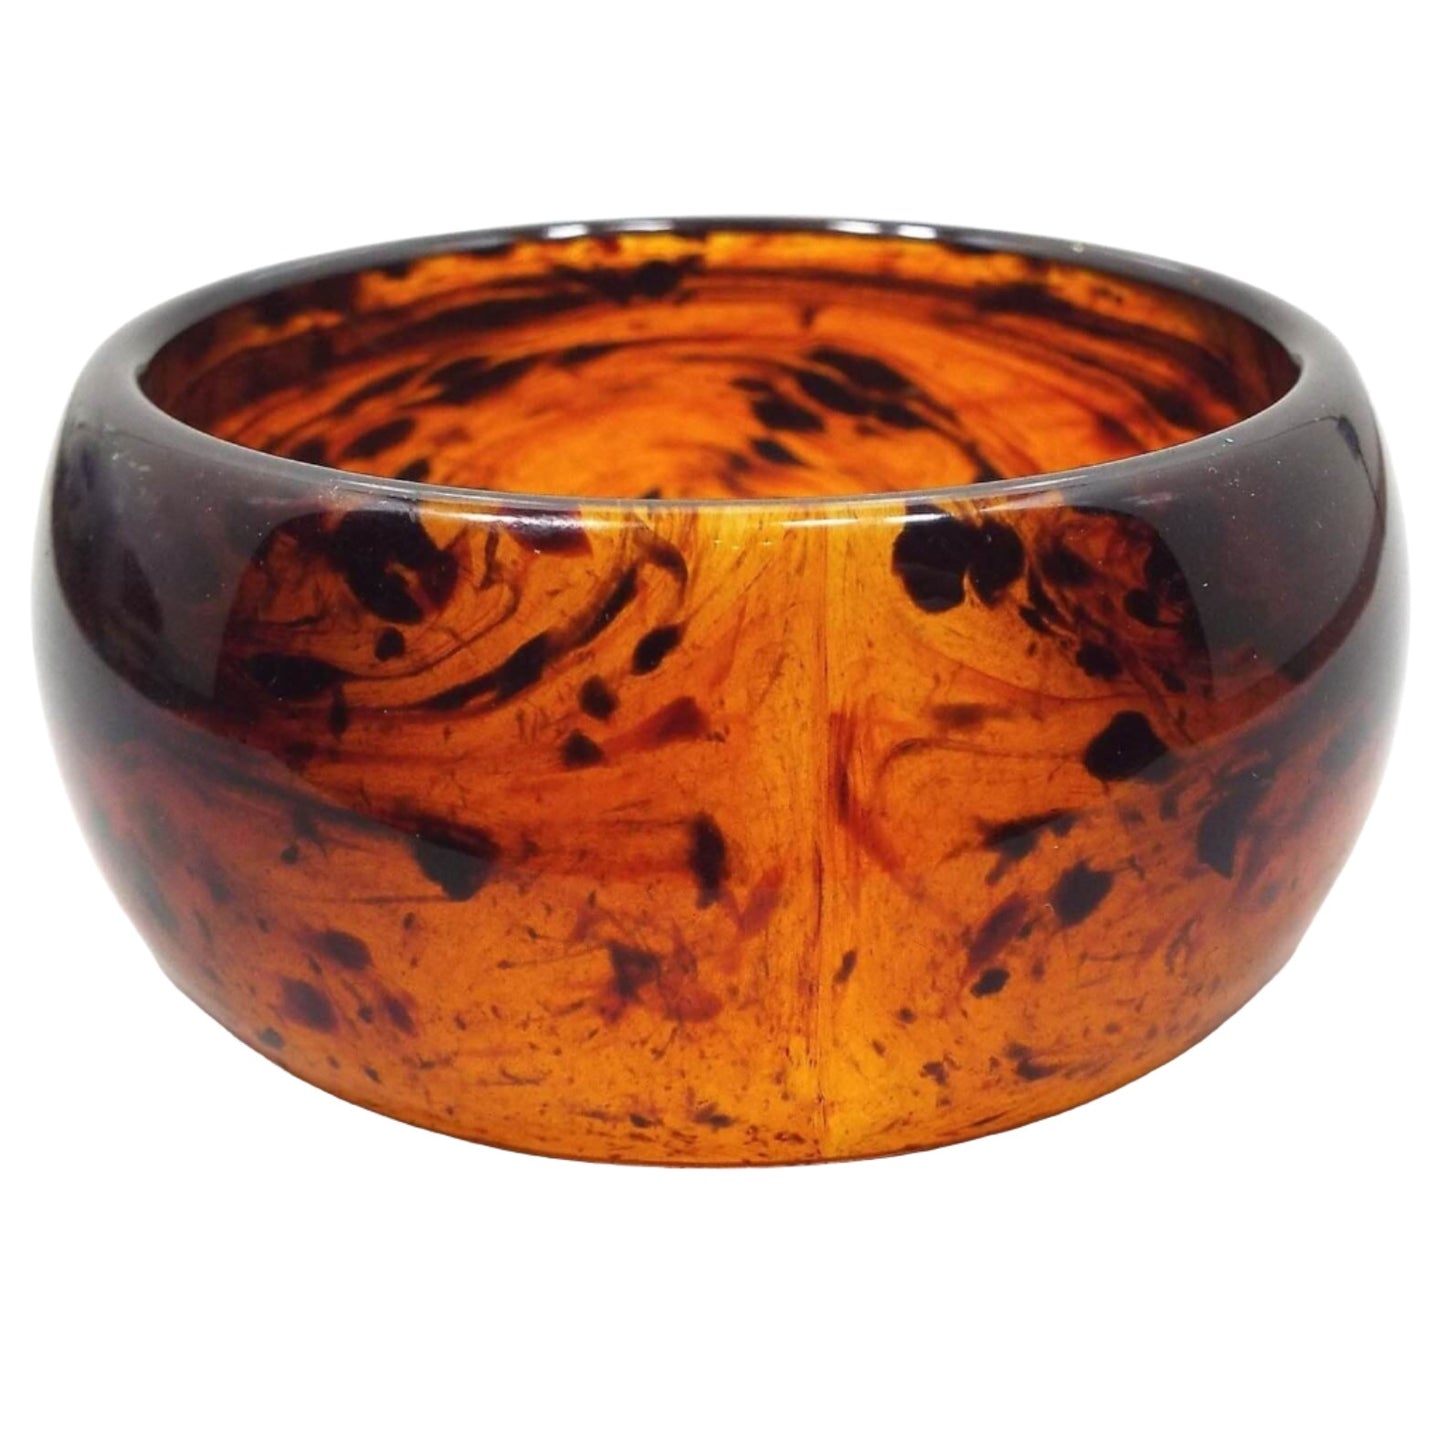 Angled front and side view of the retro vintage lucite plastic bangle bracelet. It is a very wide bangle with curved outer edge. The lucite is semi translucent with areas of orange, brown, and black.